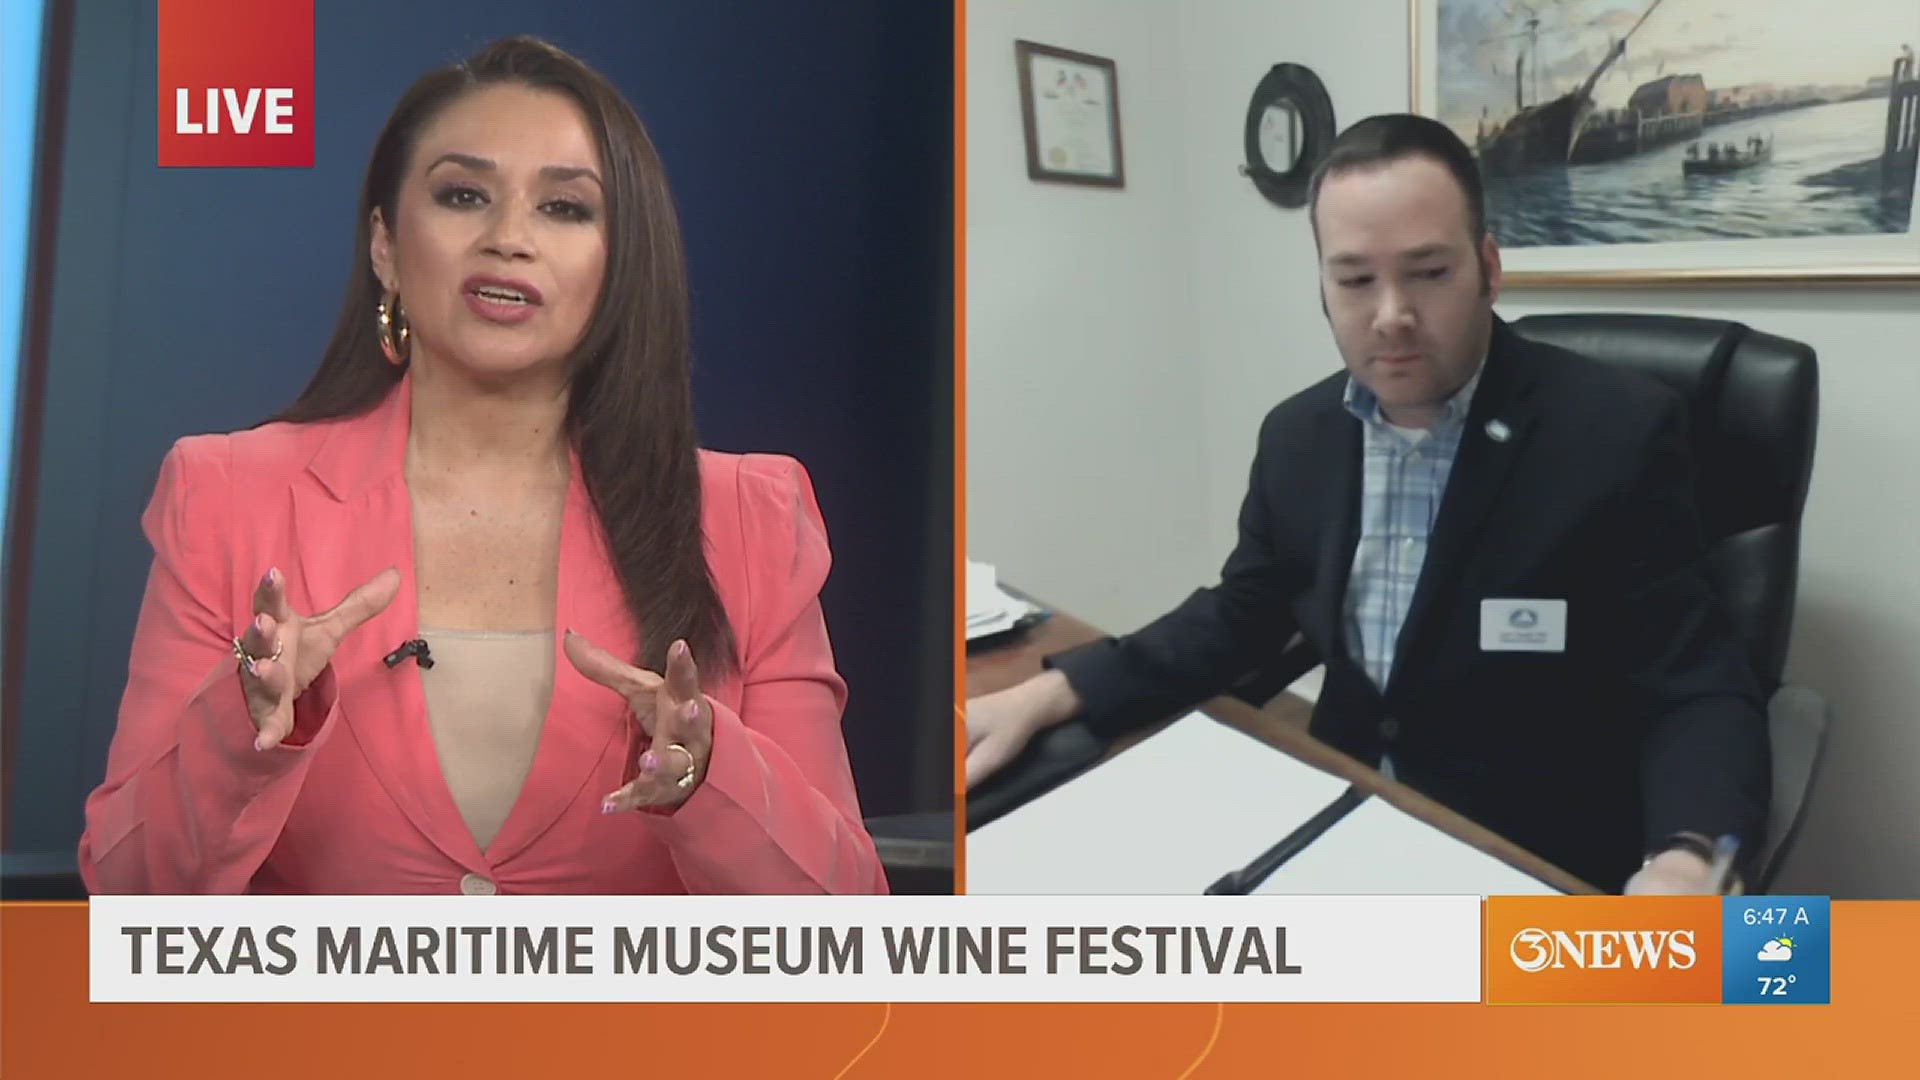 All proceeds of the wine festival will go to the Texas Maritime Museum and their efforts to educate the public about Texas' rich maritime history.